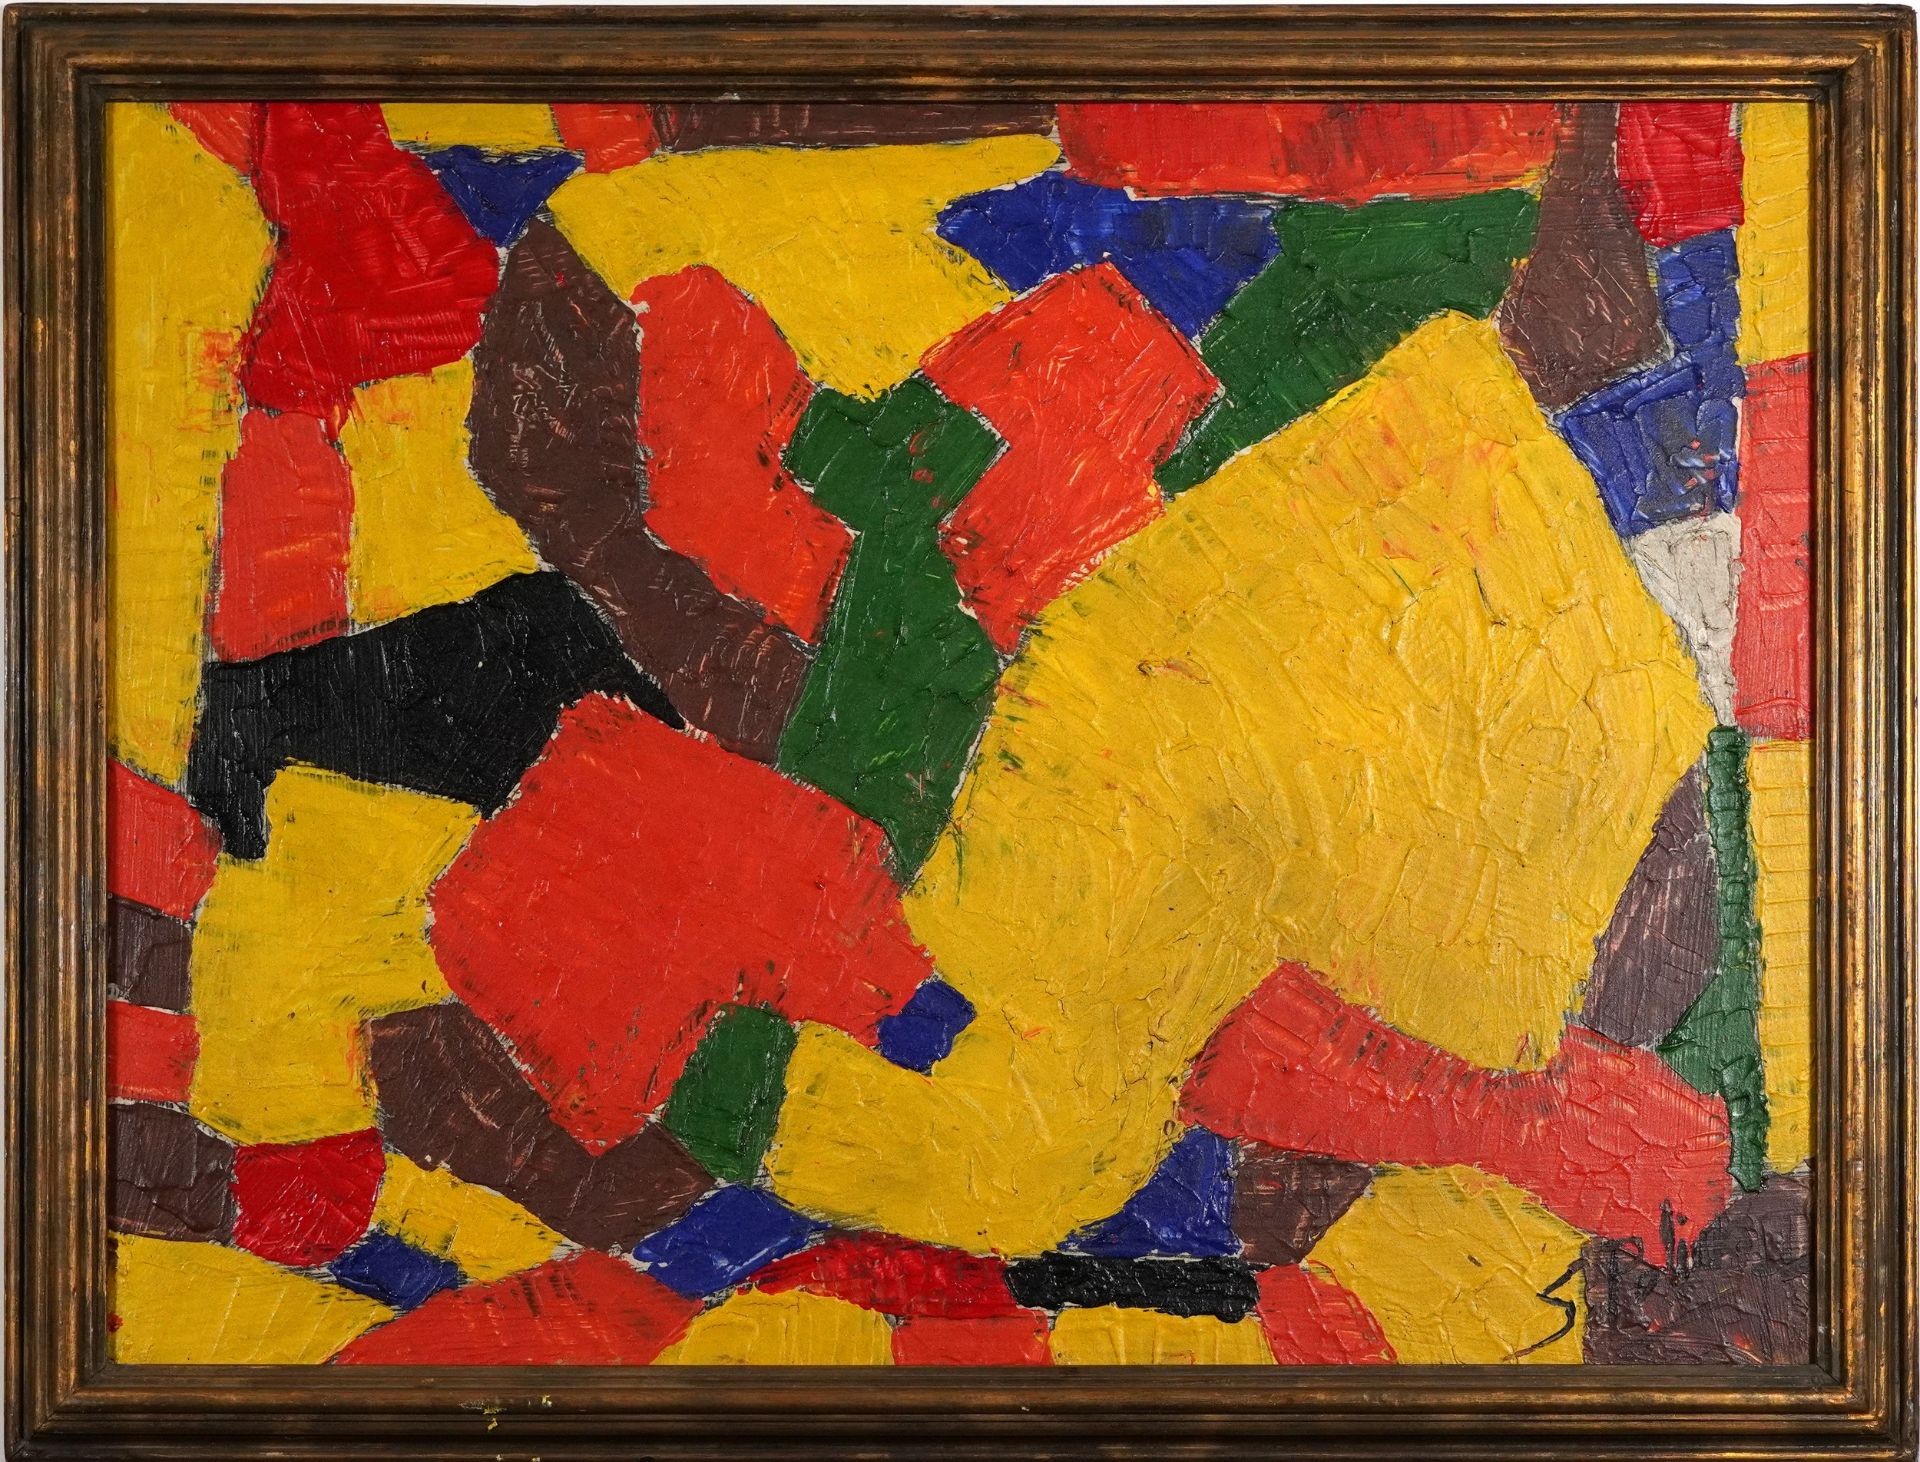 Abstract composition, geometric shapes, Russian school impasto oil on canvas, mounted and framed, - Image 2 of 4